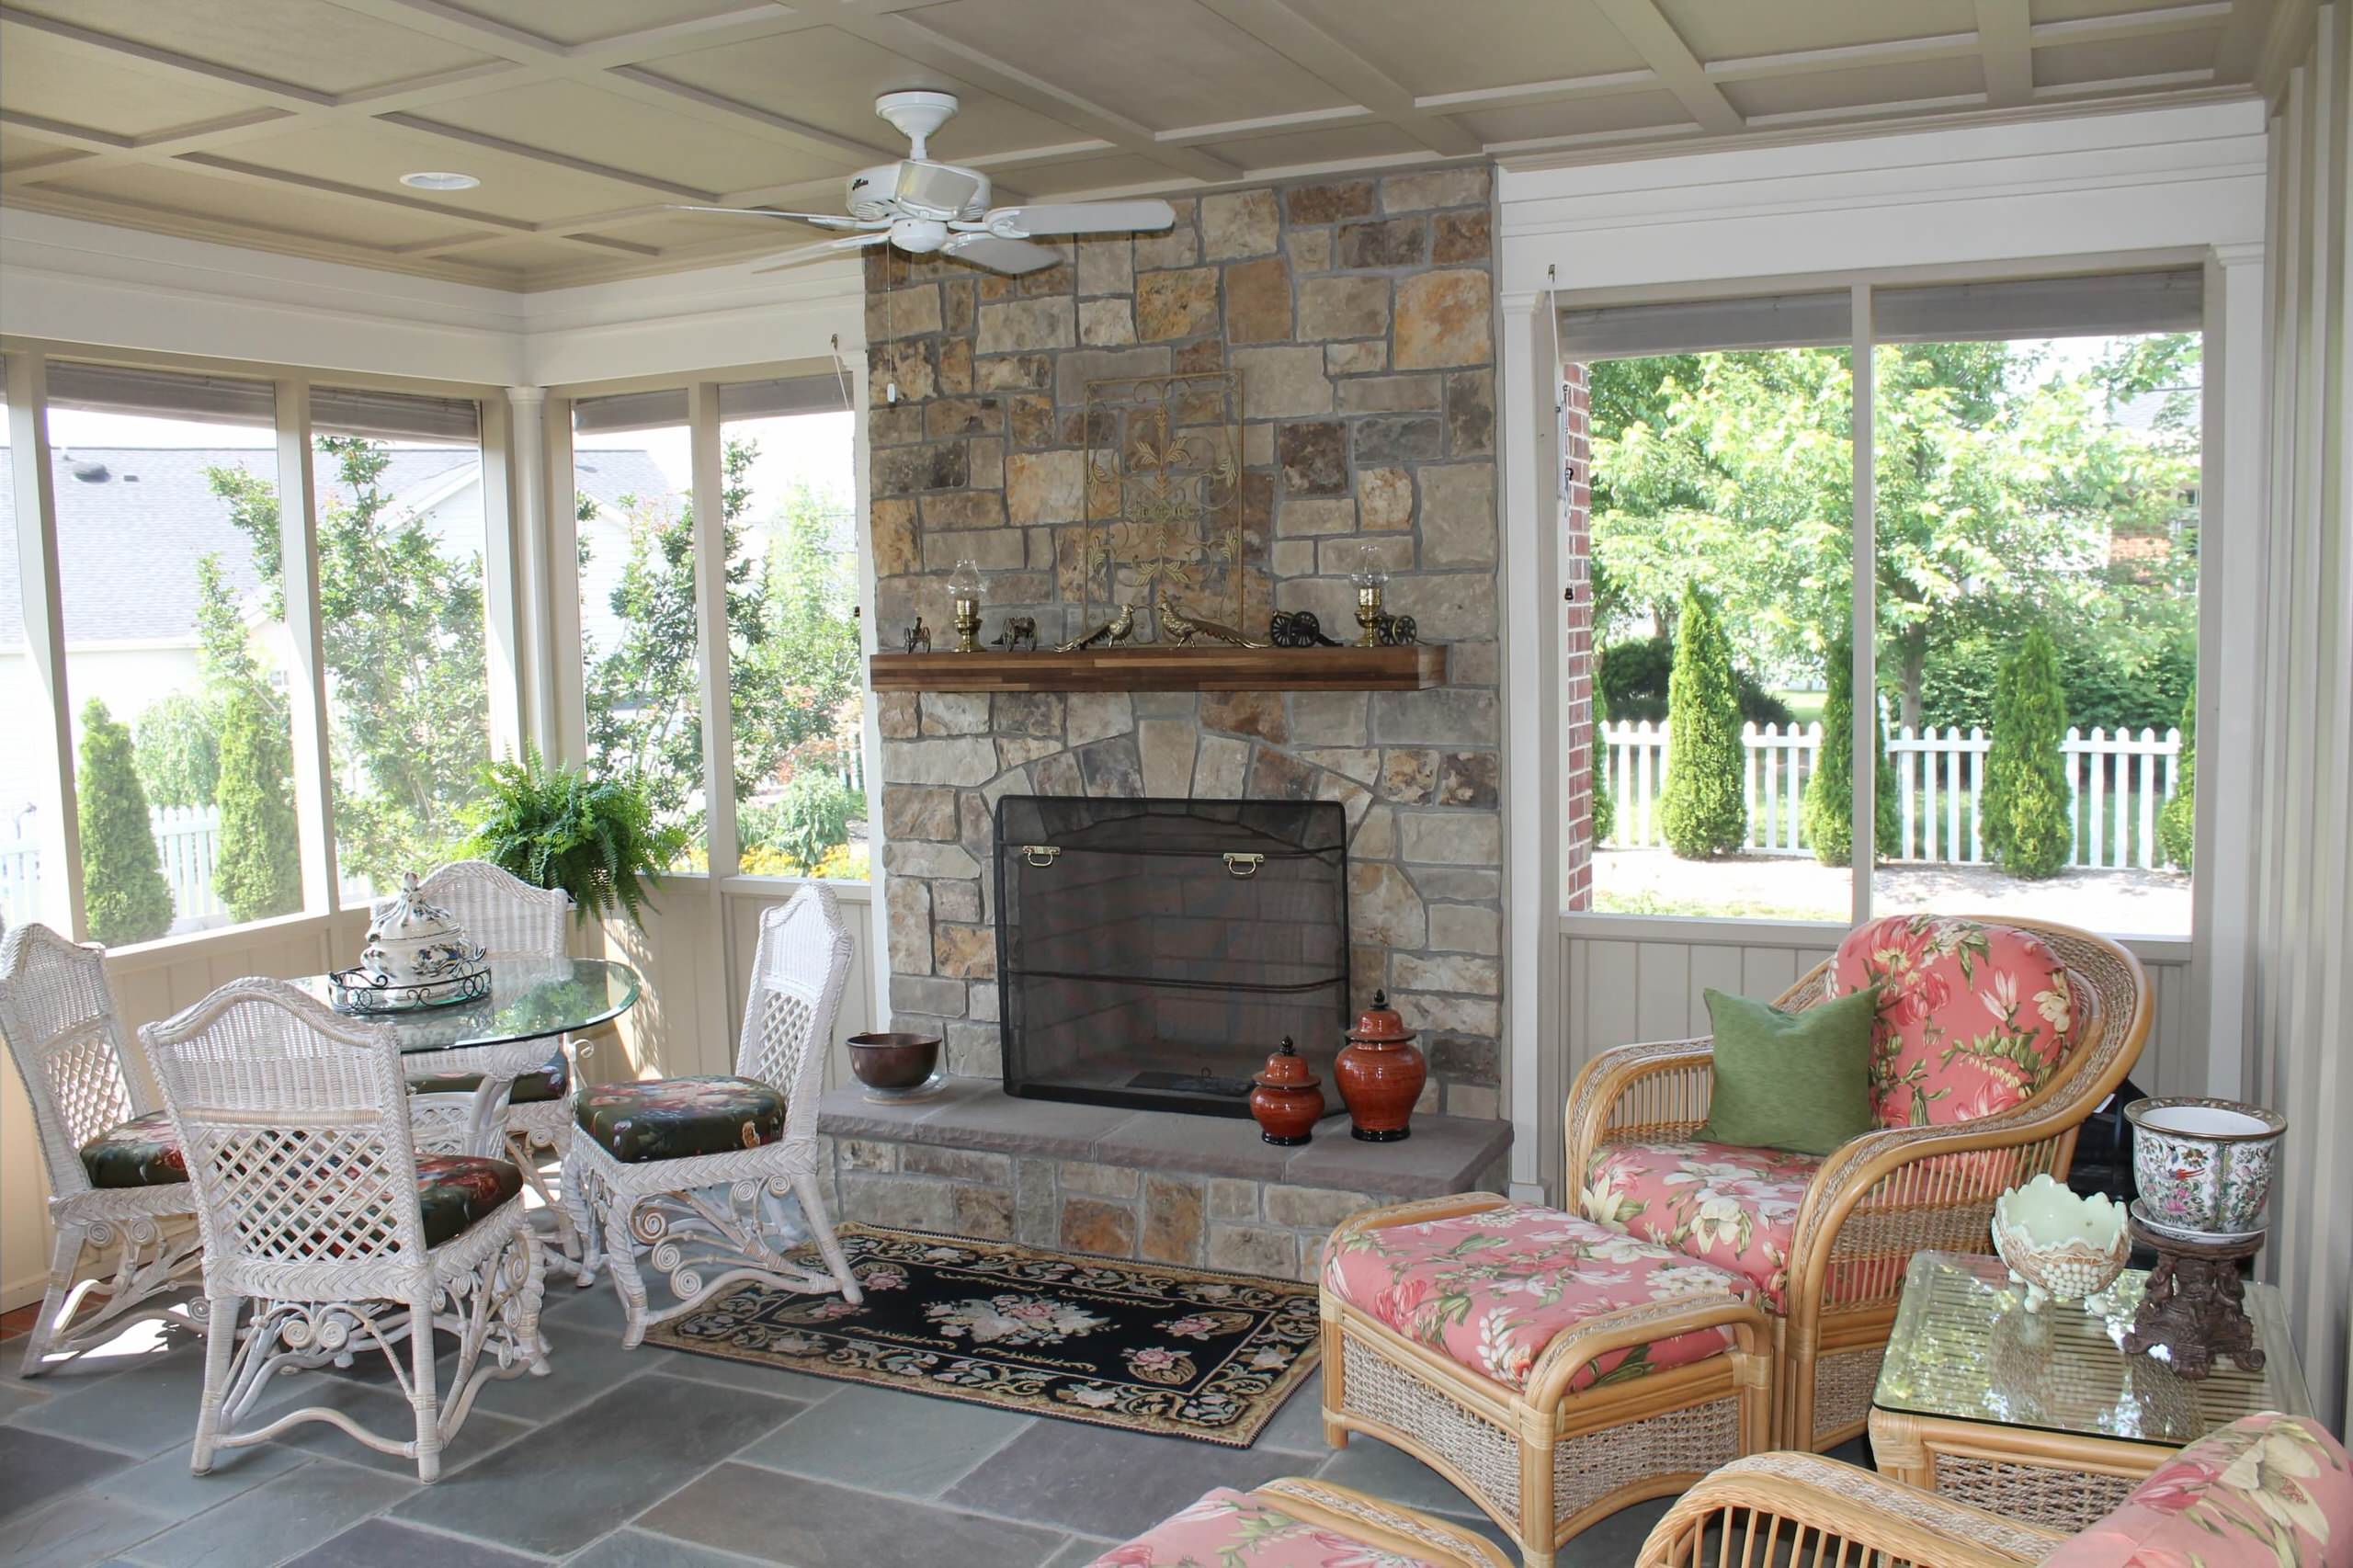 Screen porch is a beautiful outdoor living room